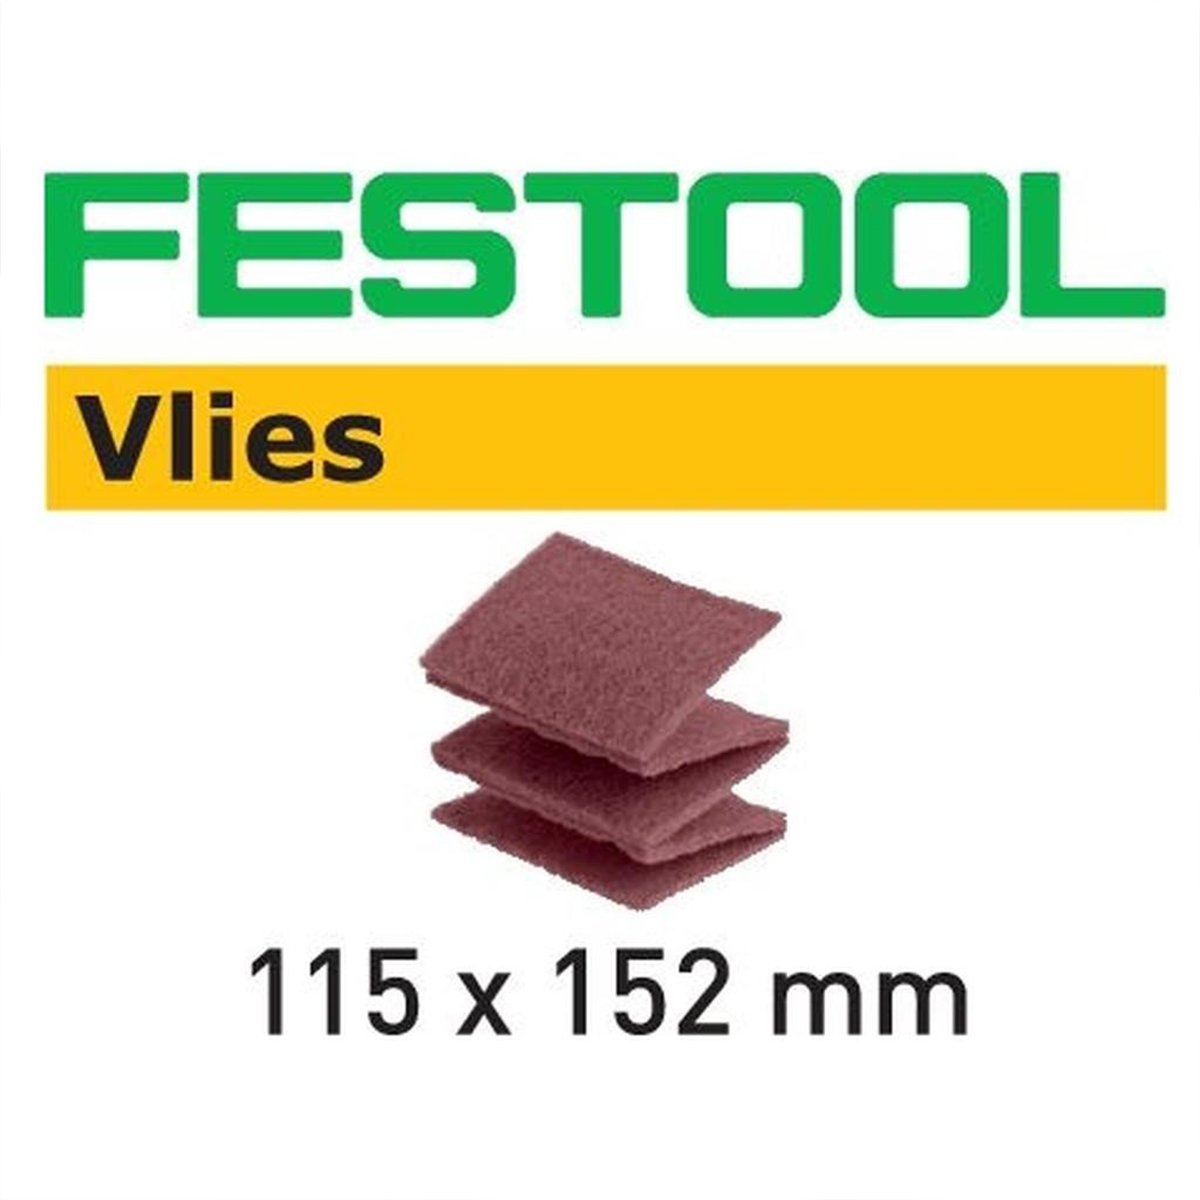 Festool Vlies woven synthetic abrasive pads are 152mm wide and perforated every 115mm for separation.